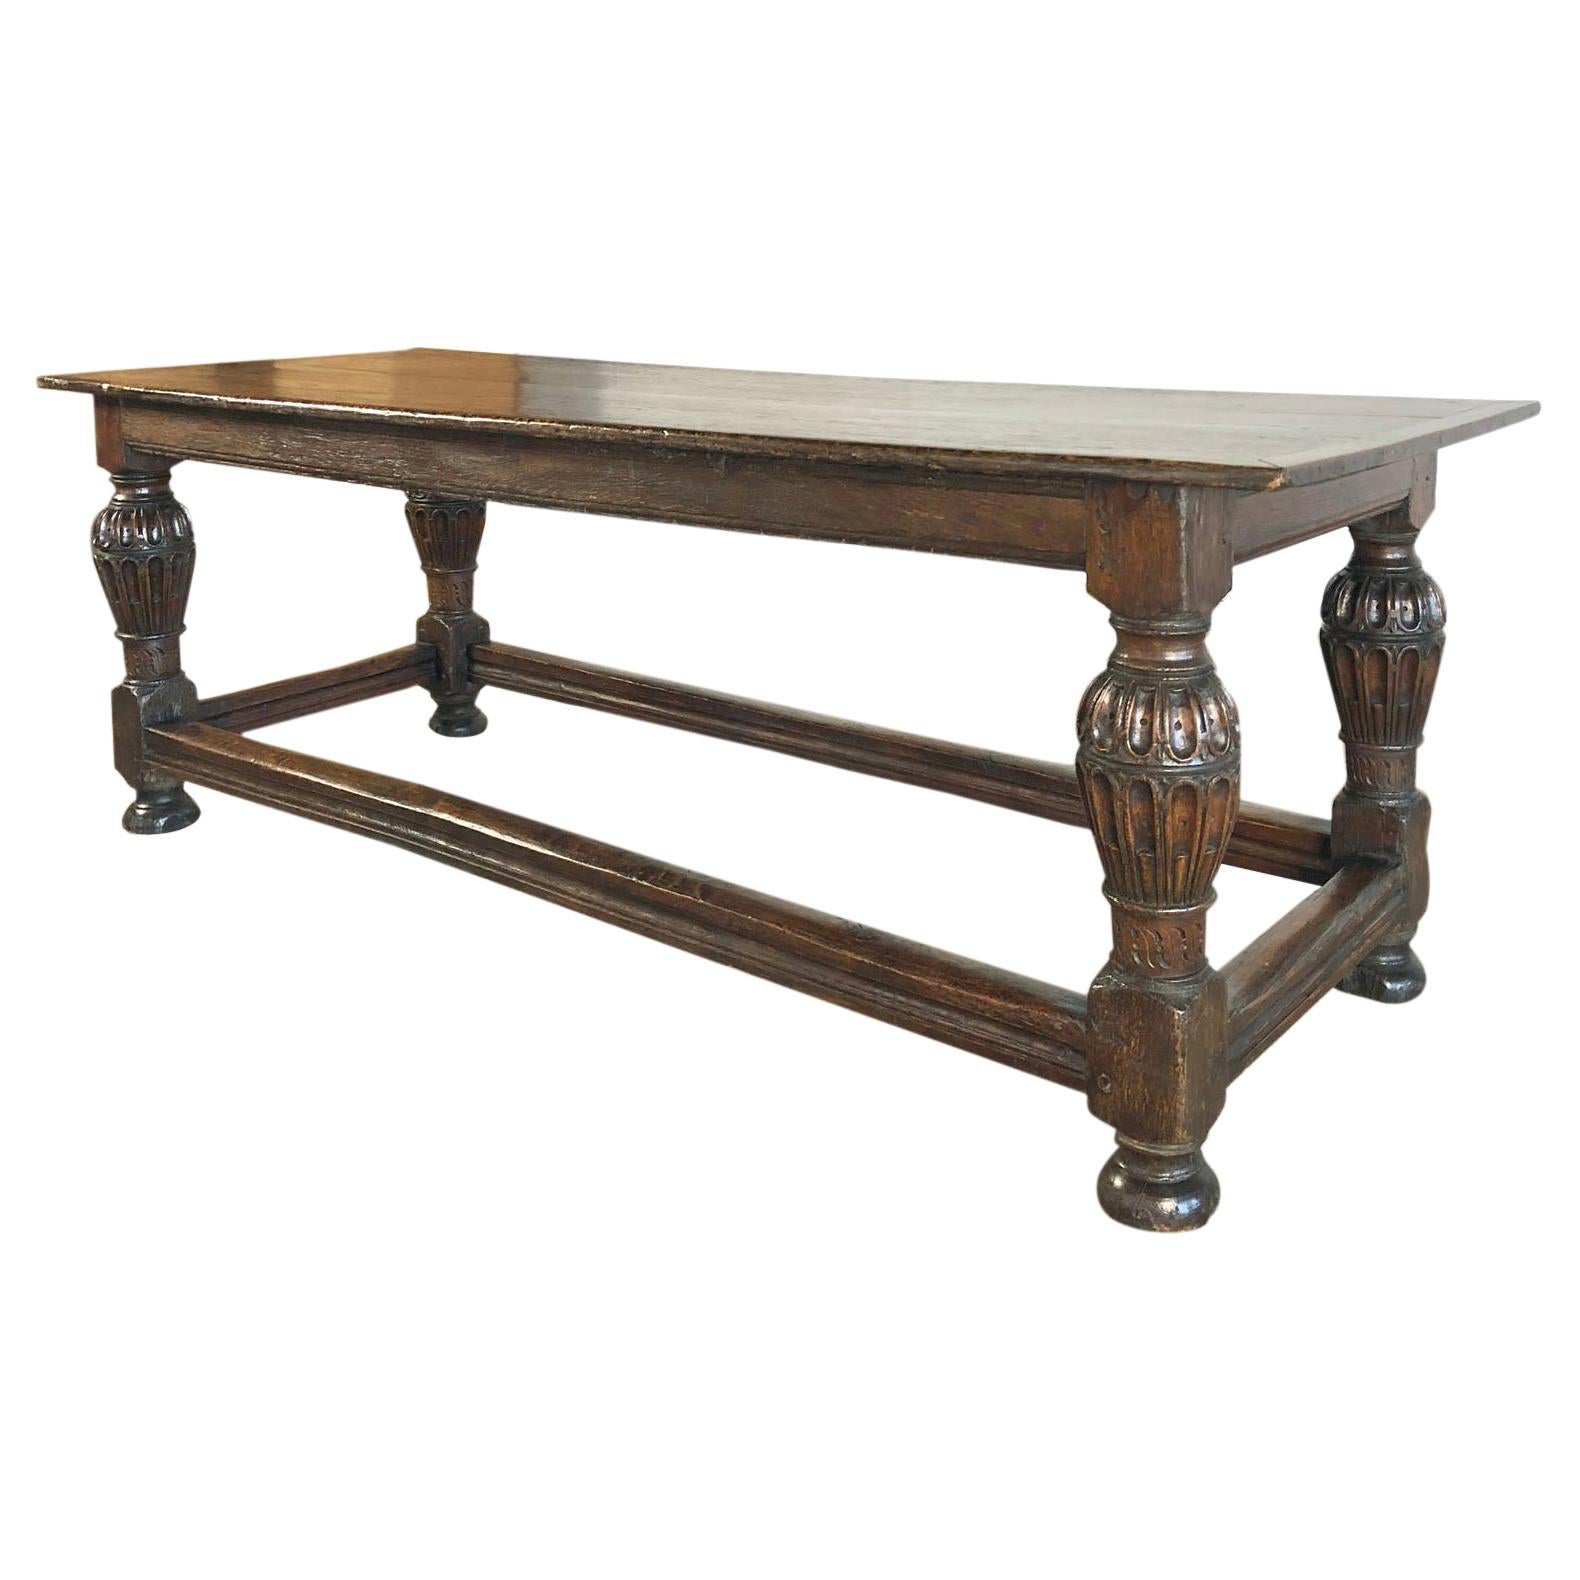 English Elizabeth I Oak 16th Century Refectory or Center Table For Sale